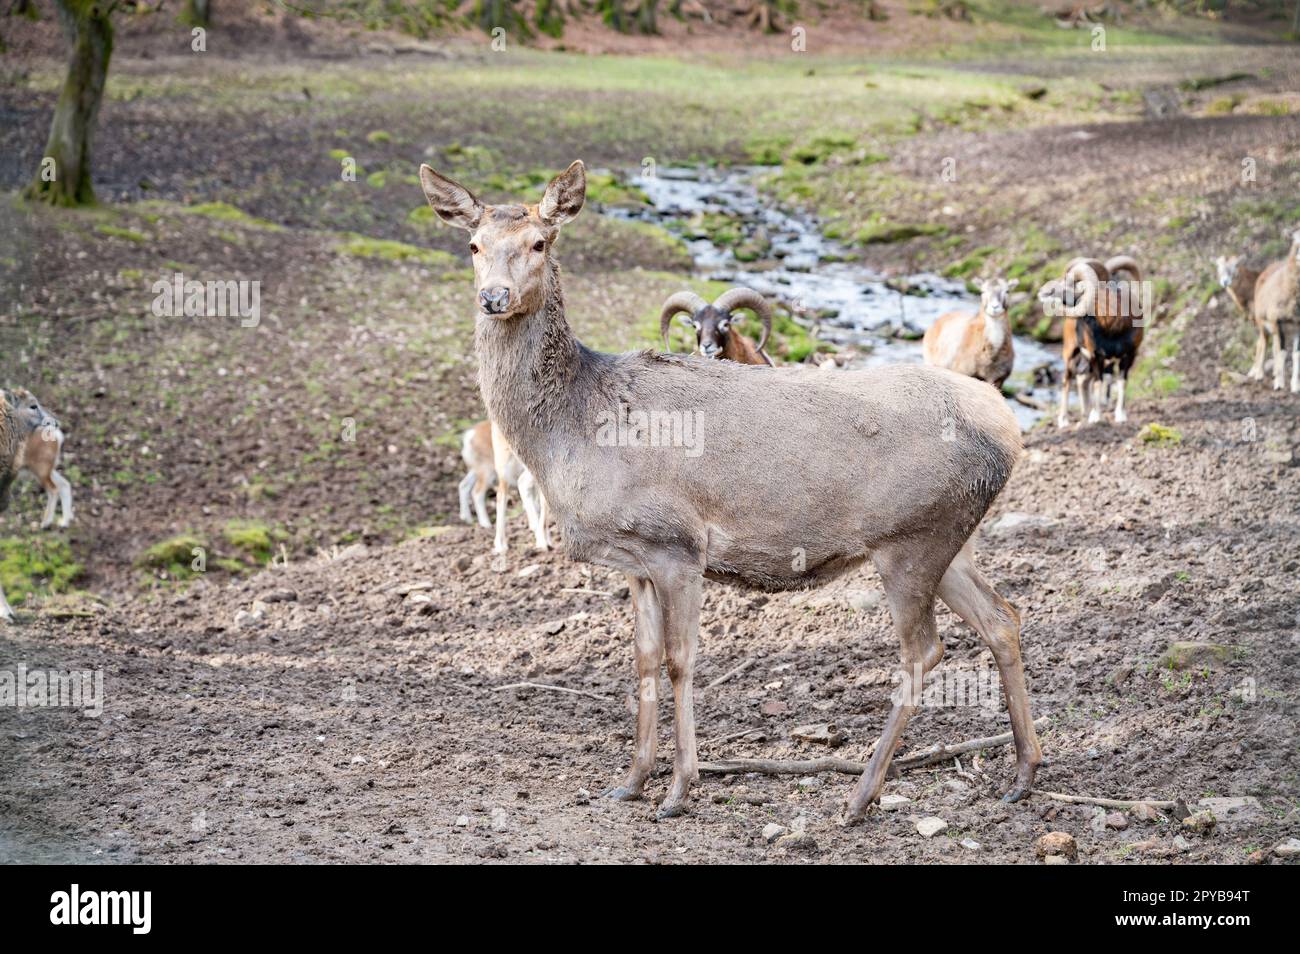 Doe, Female Deer Cow standing in front of a group of goats and billy goats, looking at camera, river in the background, Wildlife Park Brudergrund, Erbach, Germany Stock Photo